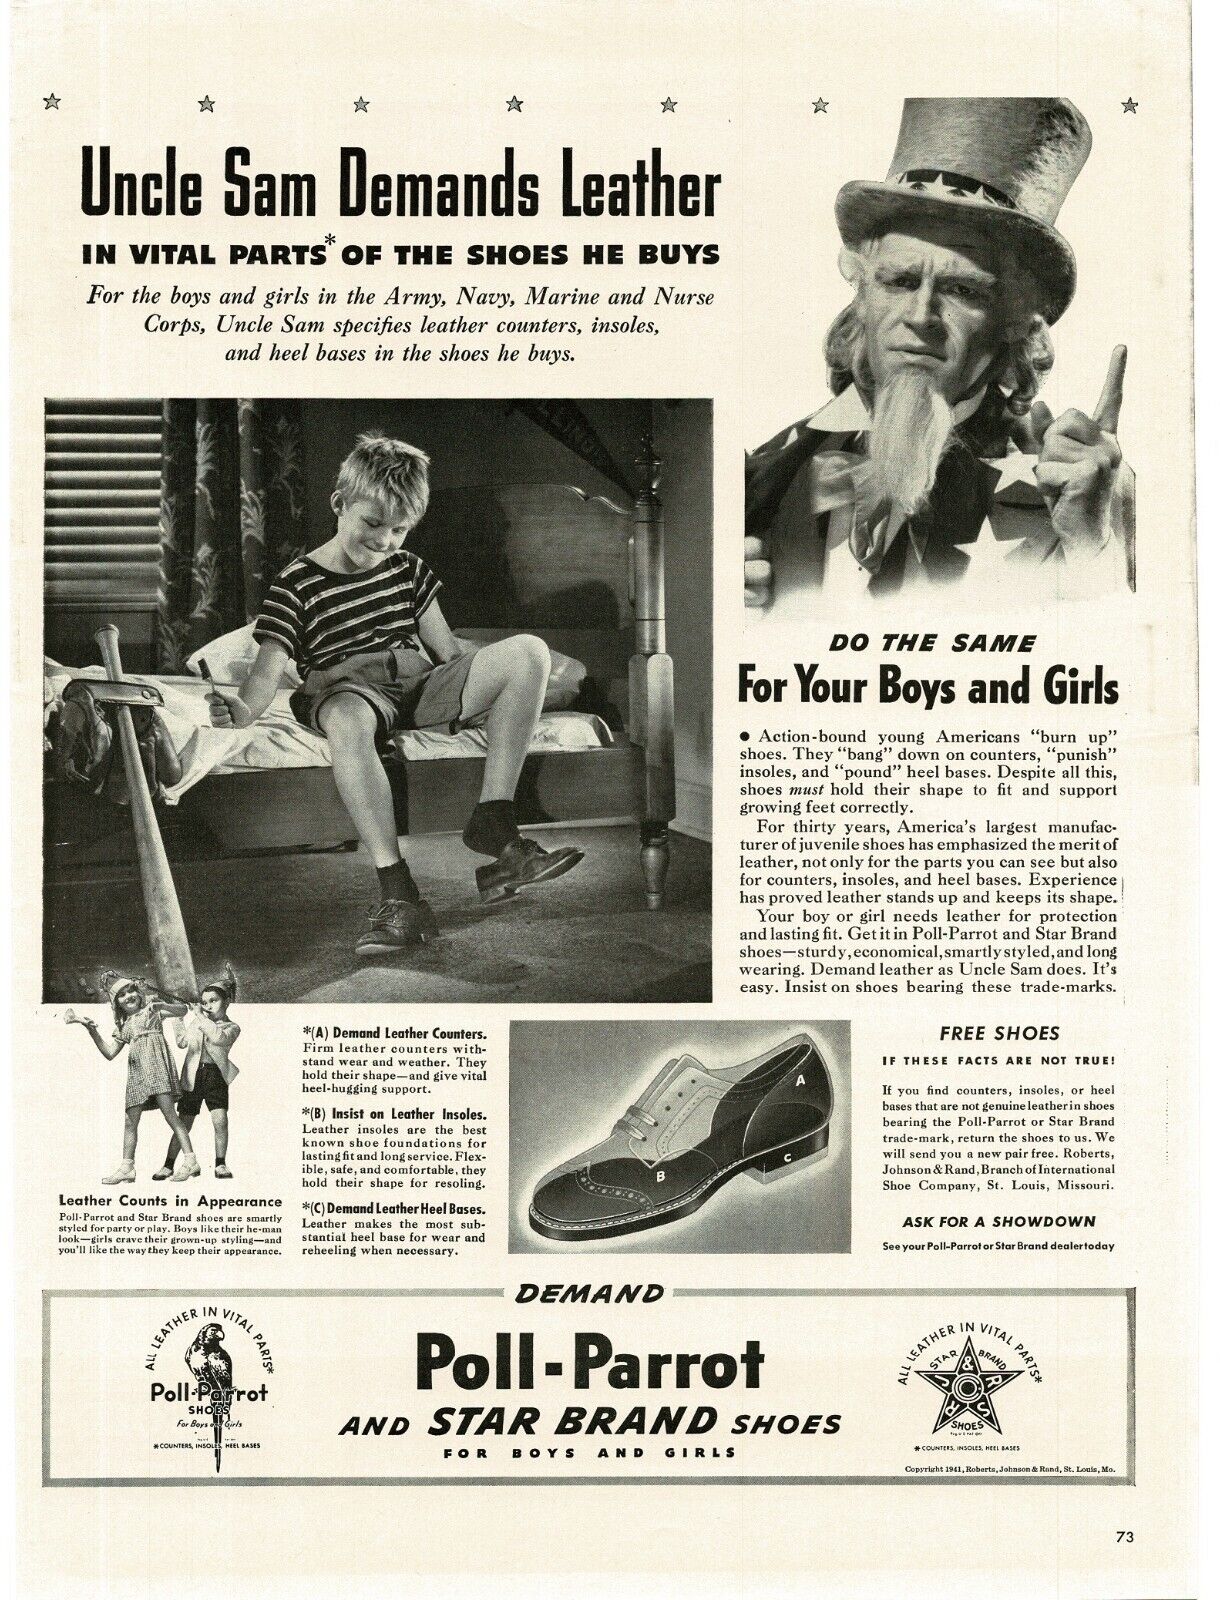 1941 POLL-PARROT Shoes for children Uncle Sam Vintage Print Ad STAR BRAND